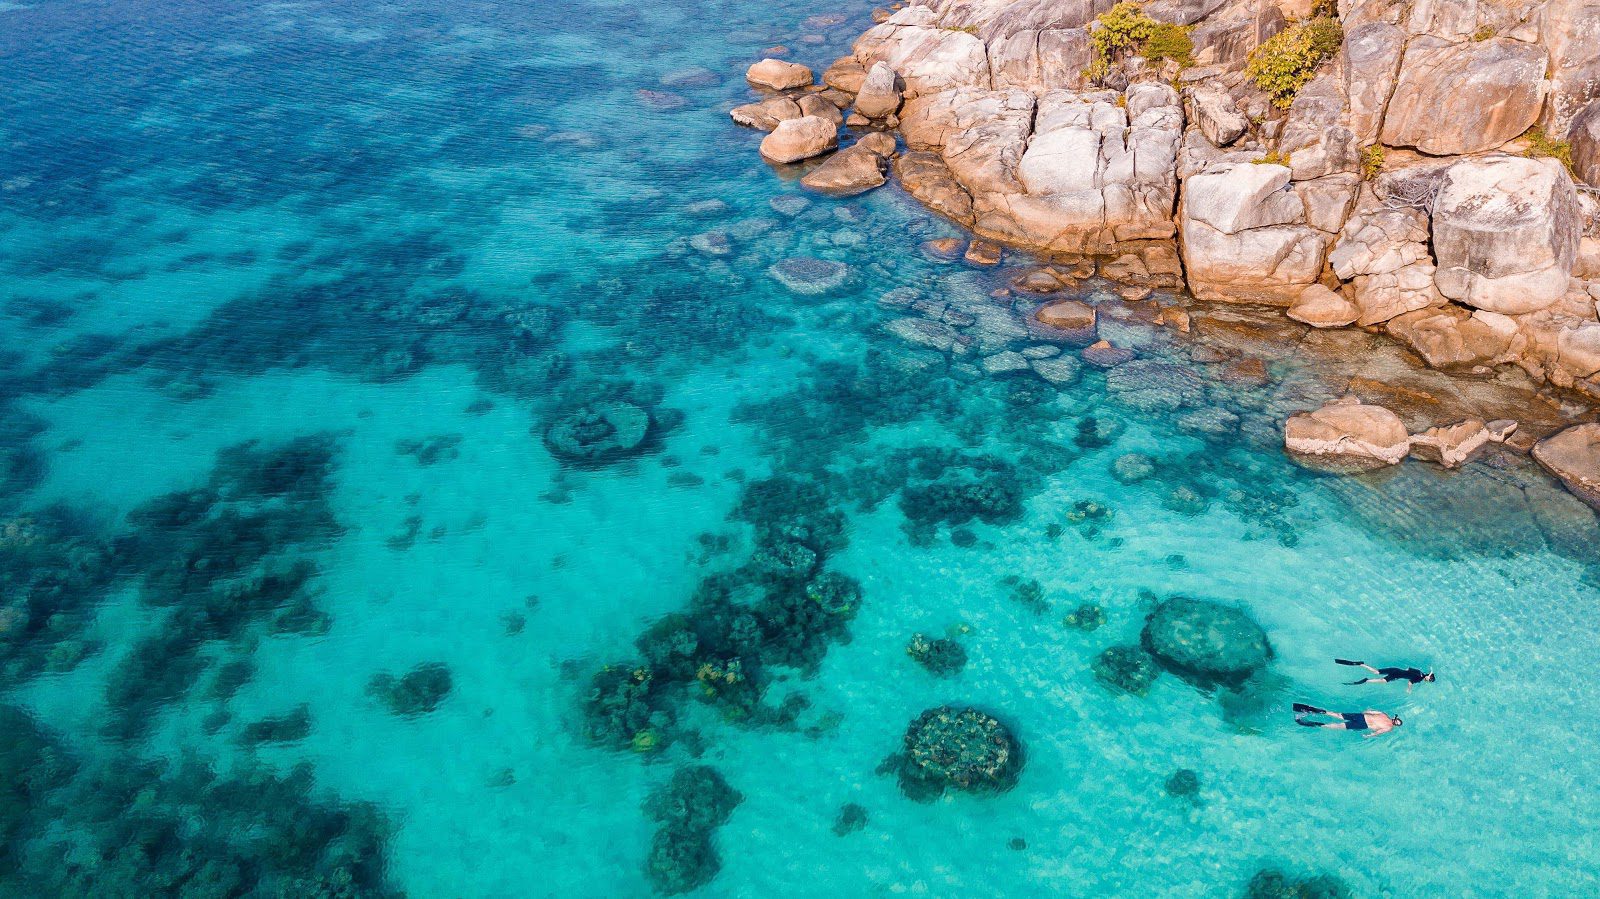 Safari to the Great Barrier Reef: How to See the Best Reefs Today, Lizard Island Resort